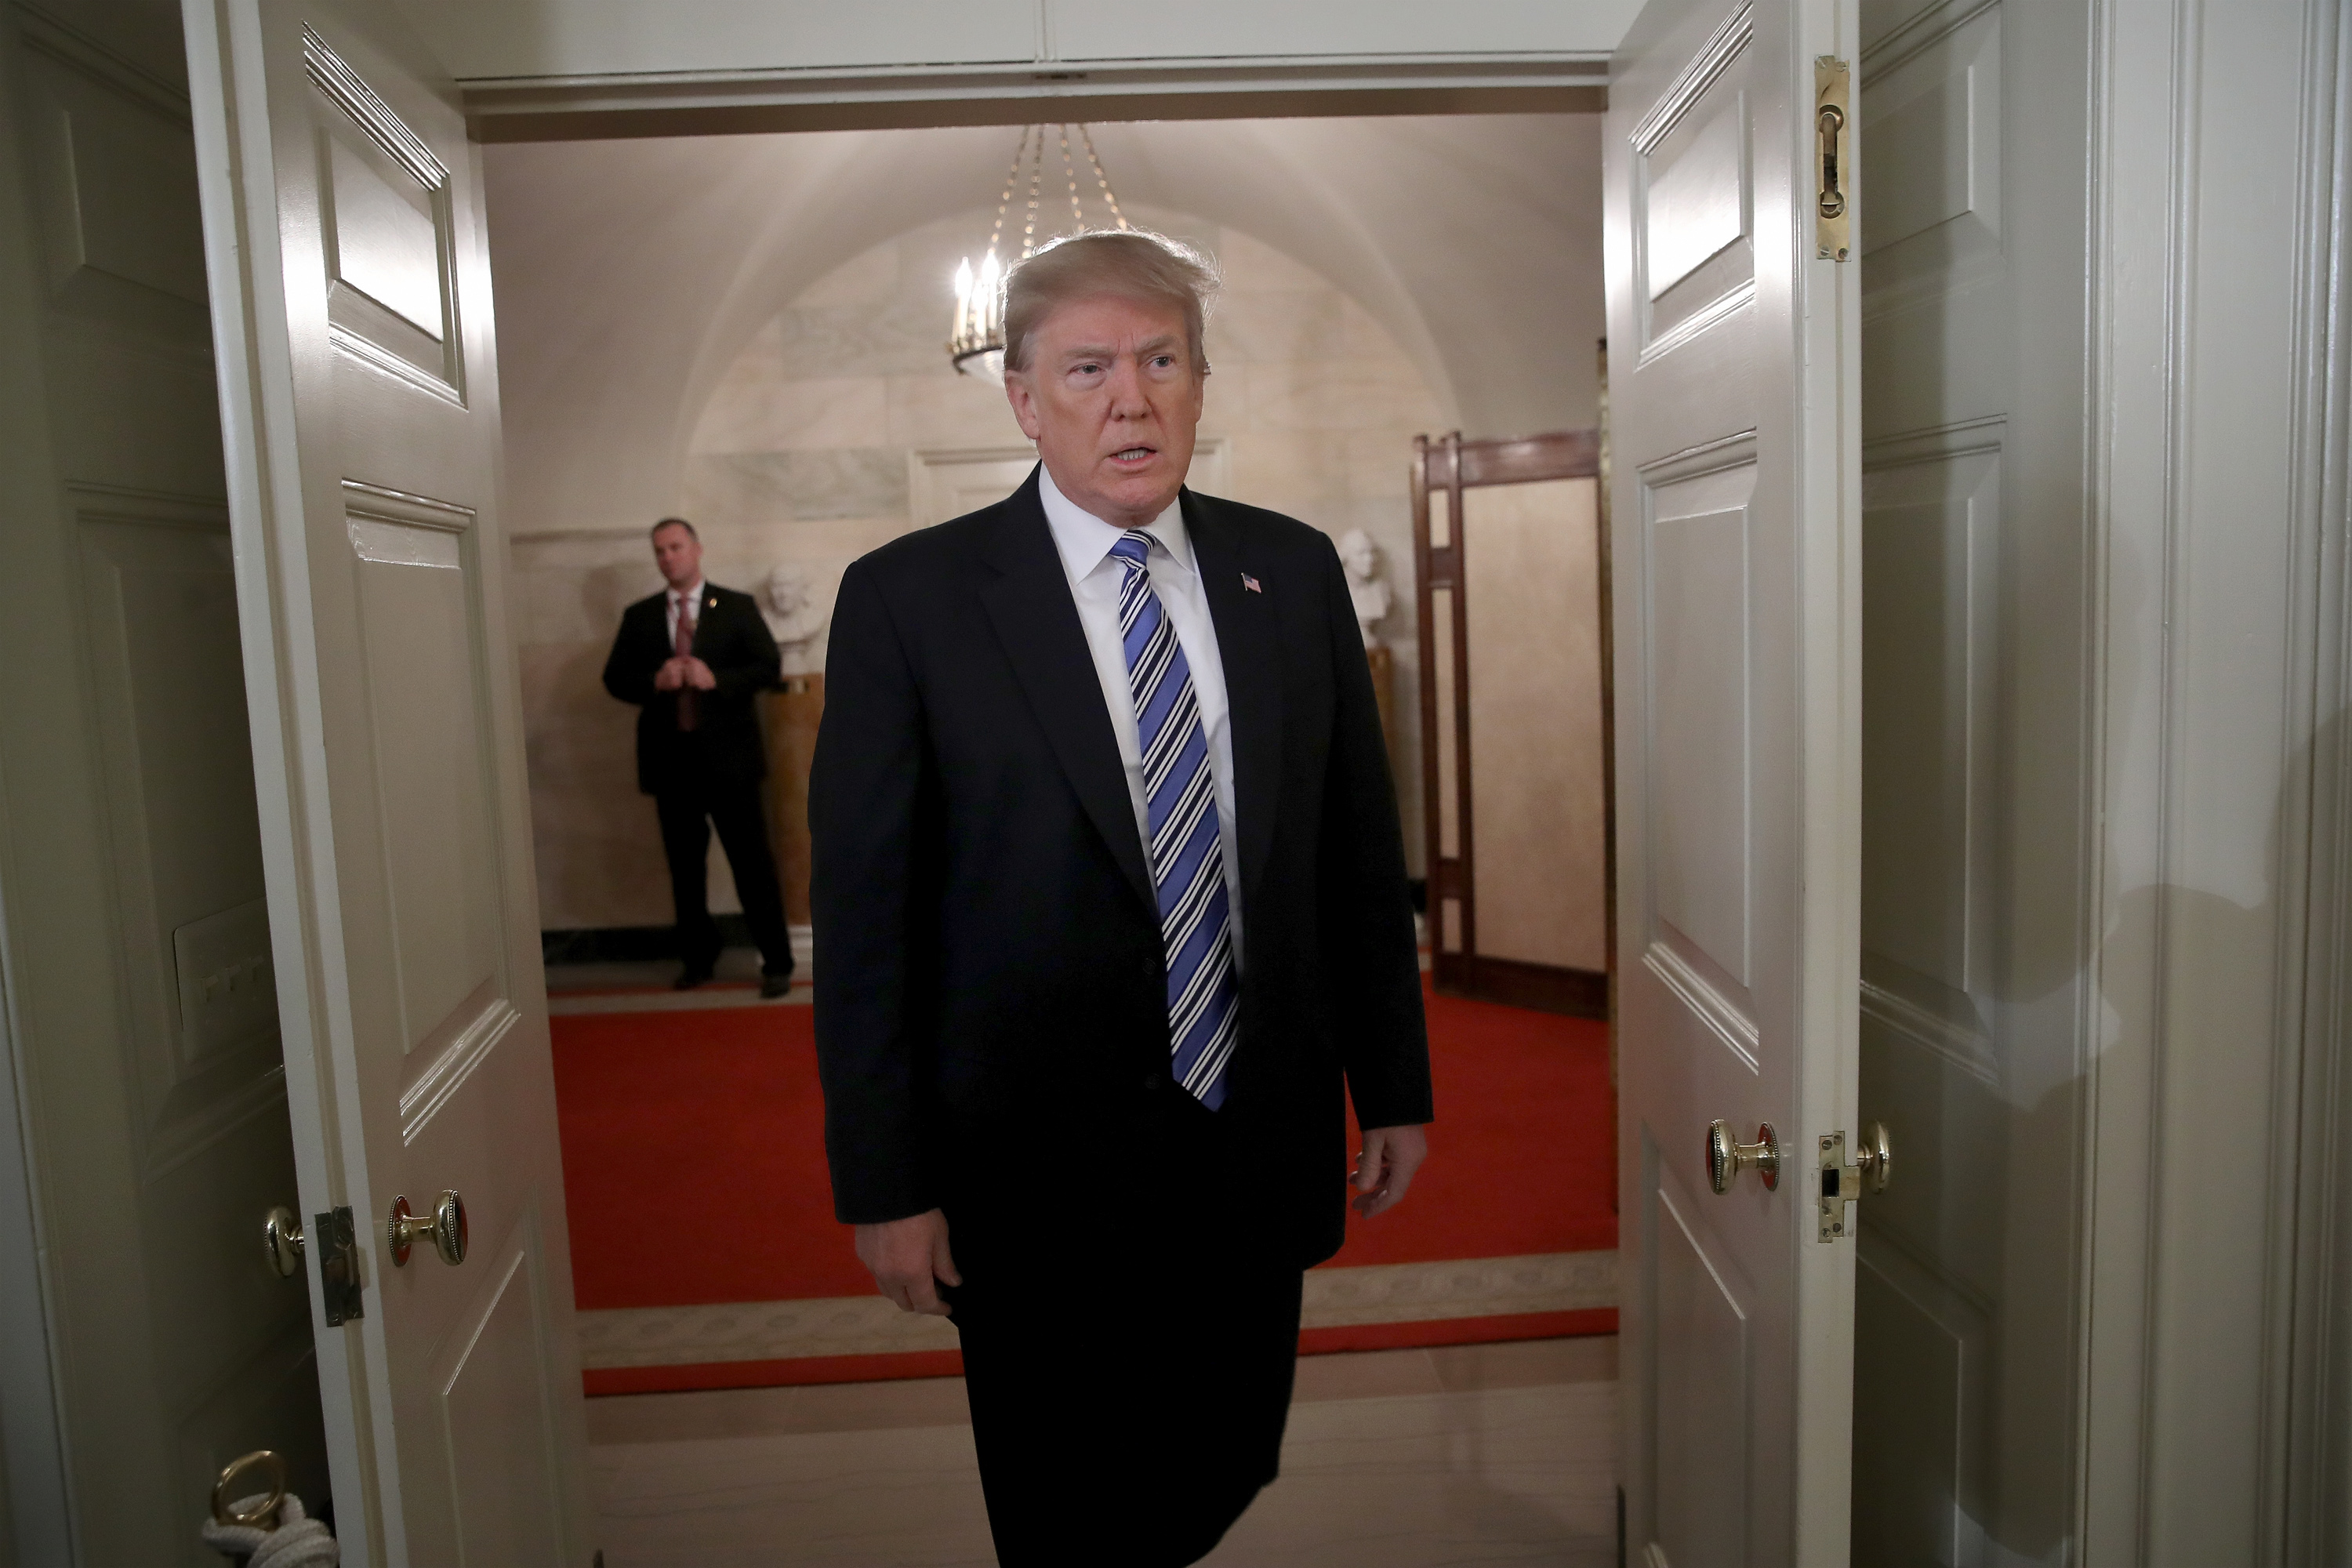 U.S. President Donald Trump arrives to deliver remarks about the shooting yesterday at Marjory Stoneman Douglas High School, at the White House on February 15, 2018 in Washington, DC. (Win McNamee—Getty Images)